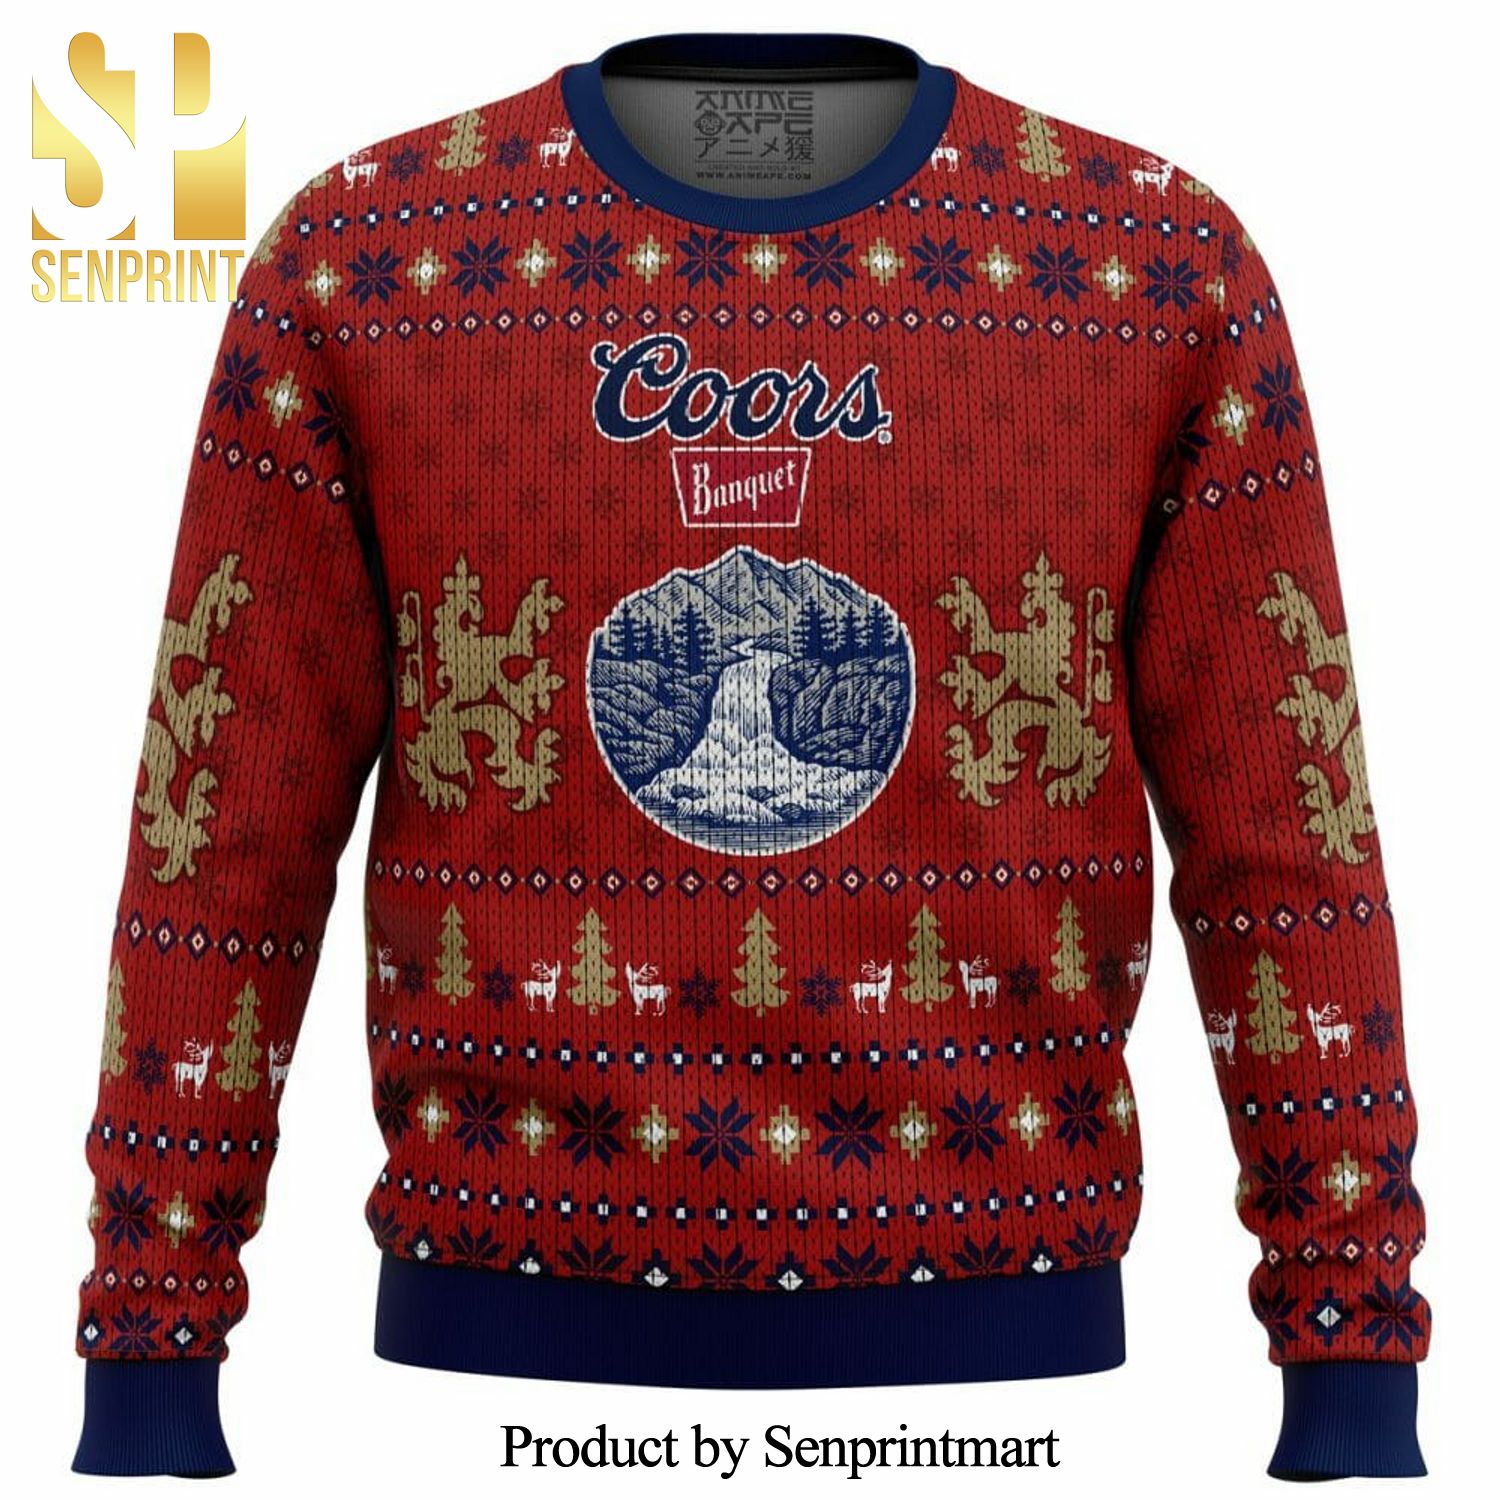 Coors Banquet Reindeer Knitted Ugly Christmas Sweater